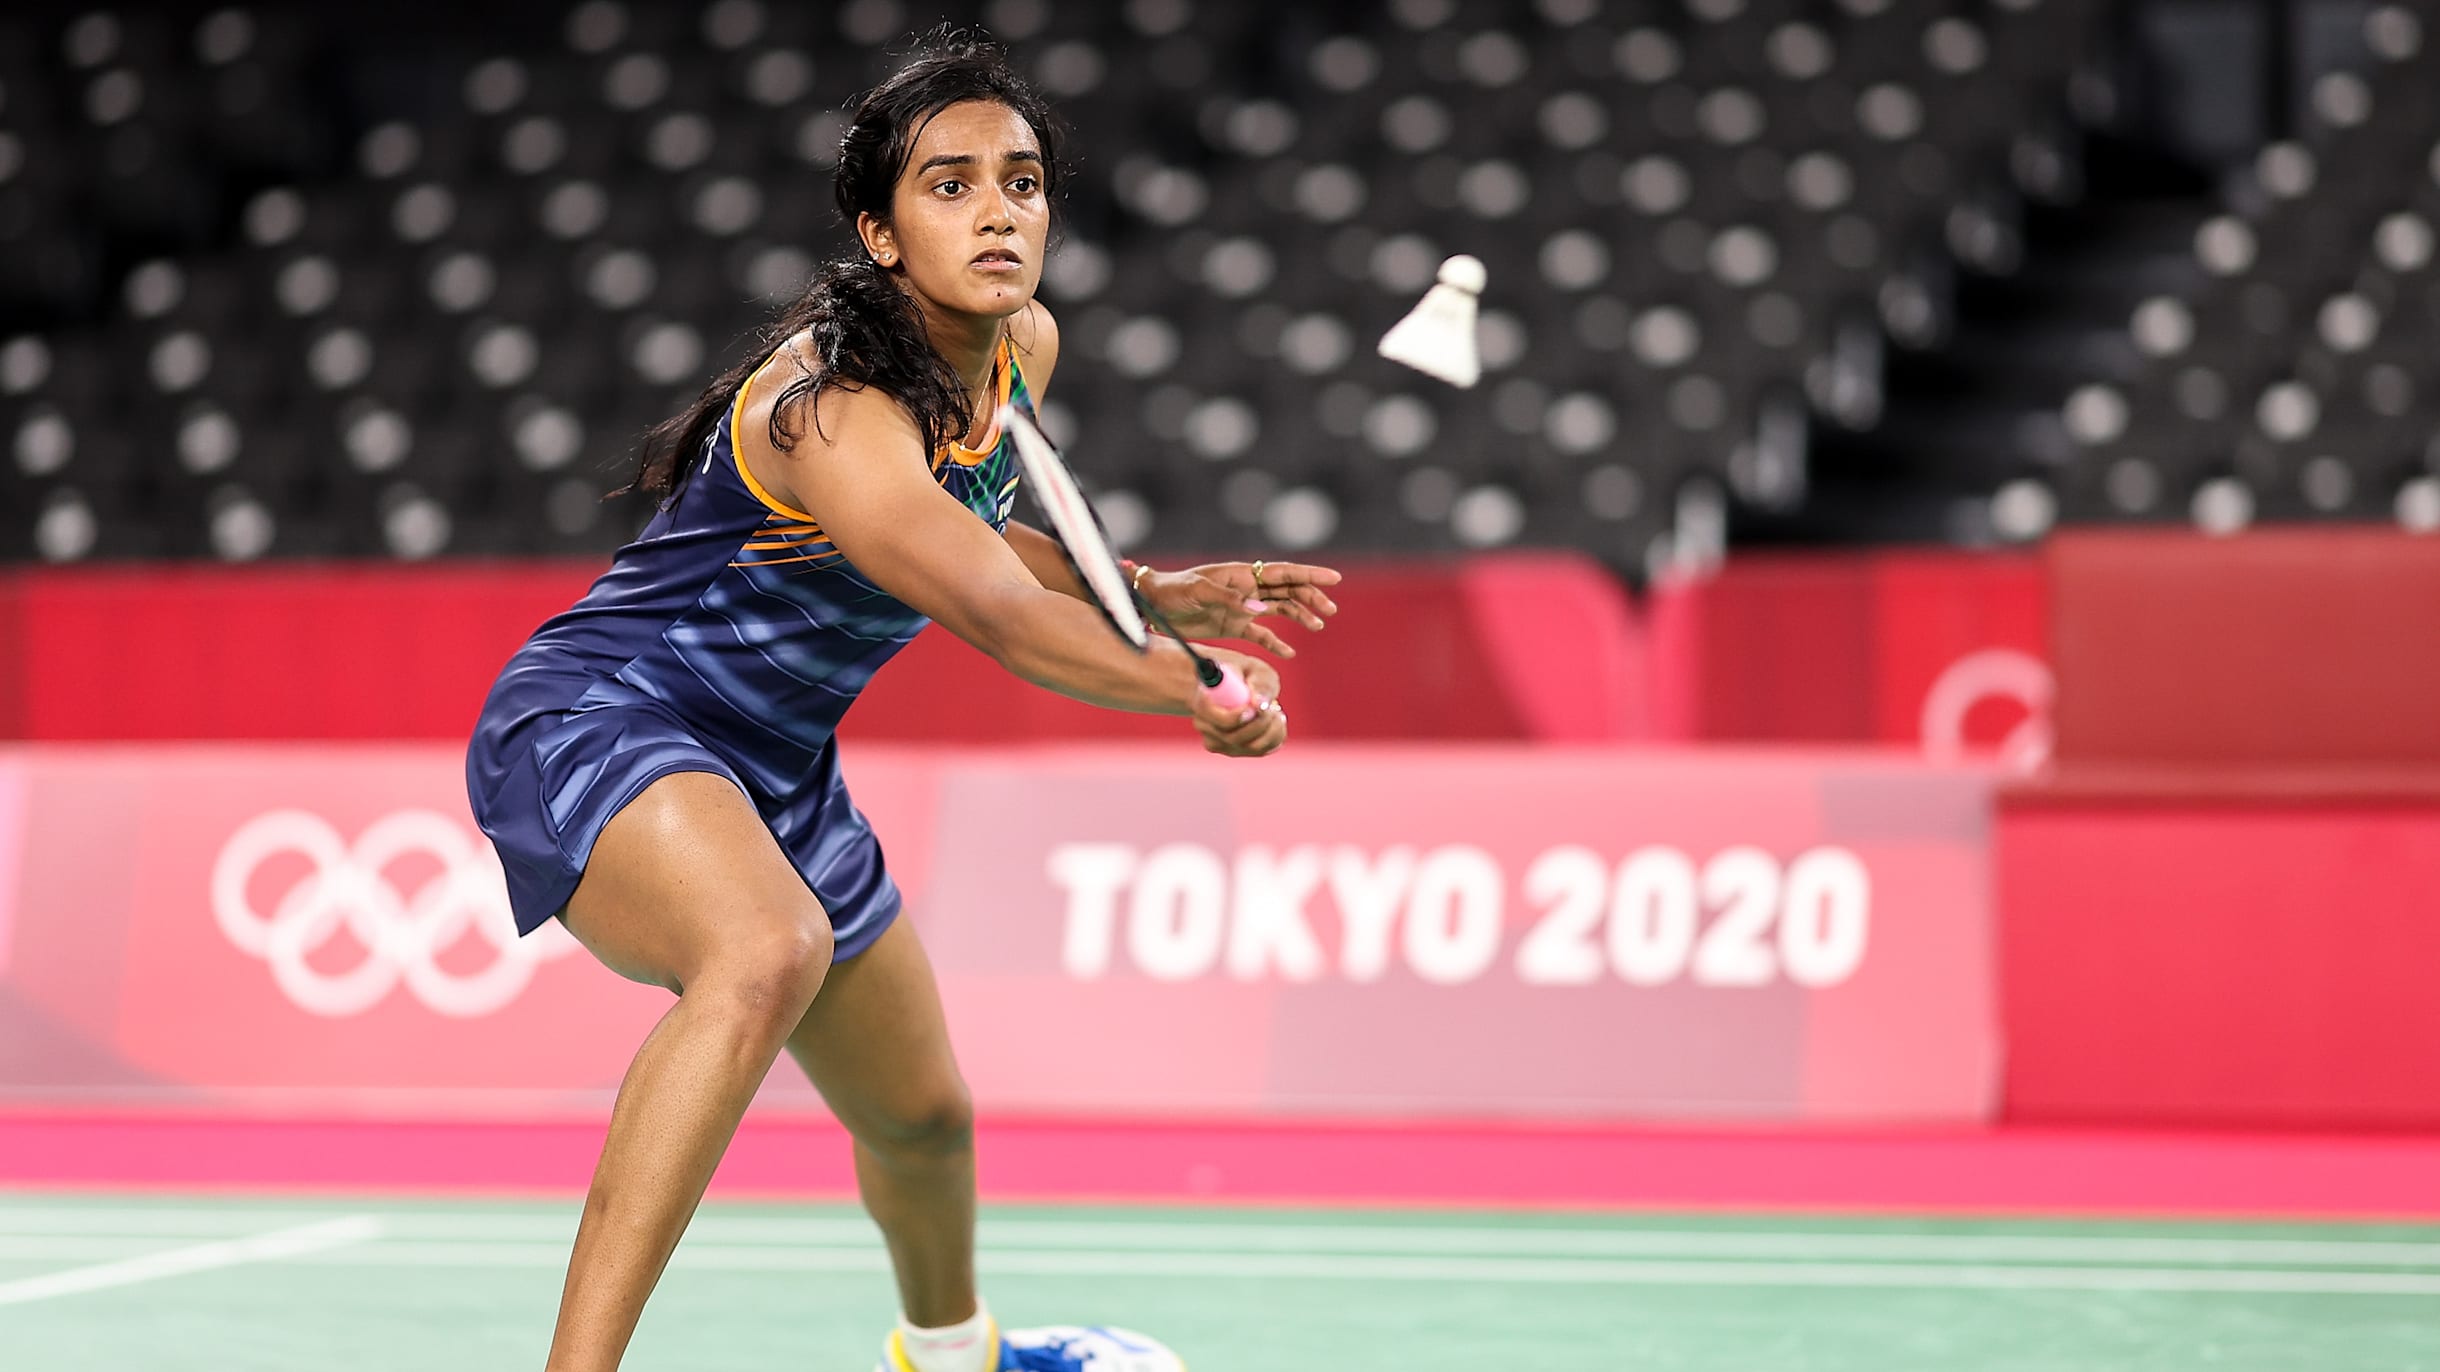 PV Sindhu vs Yamaguchi, know head-to-head and watch Tokyo Olympics badminton quarter-finals live in India